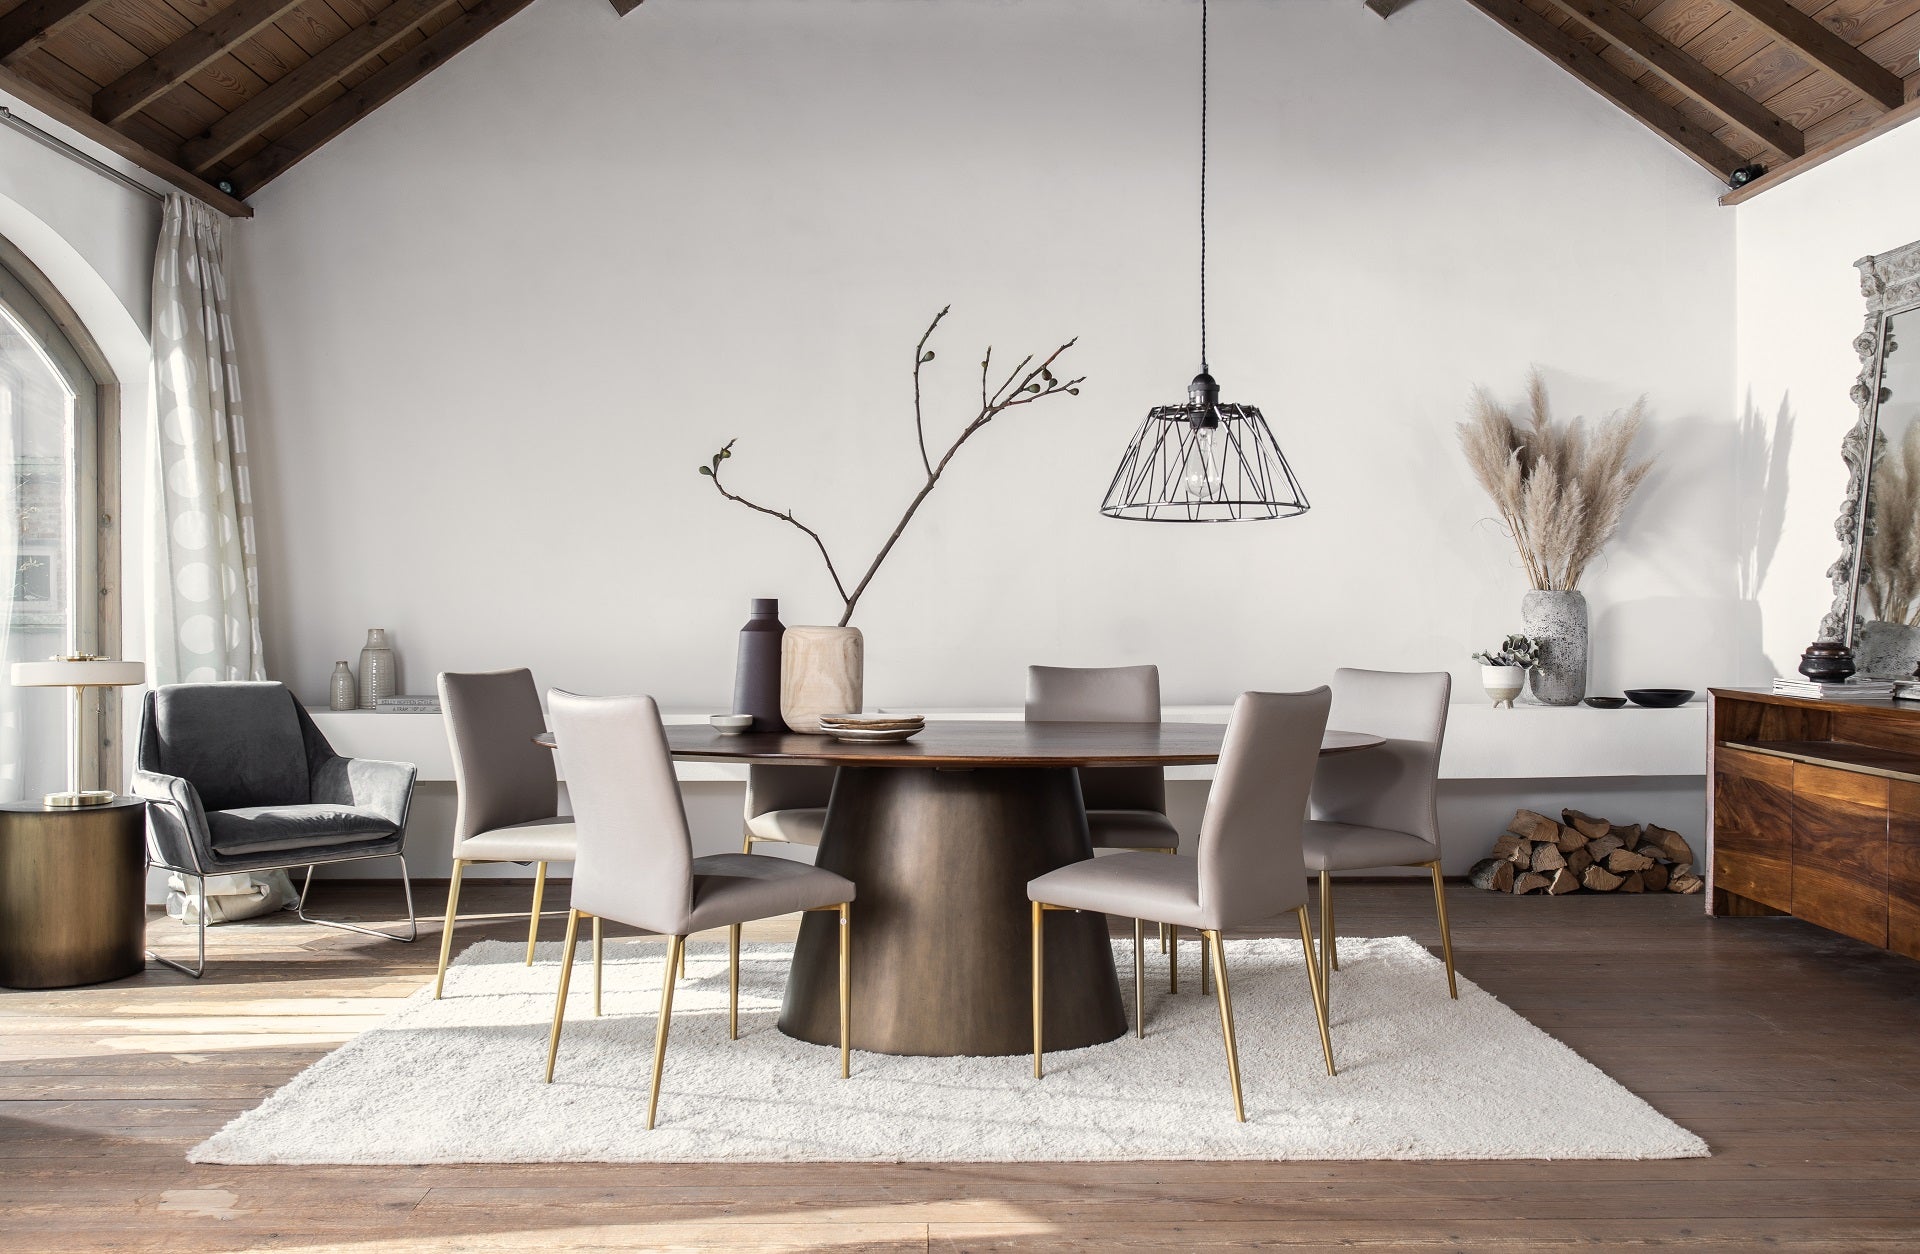 Jakarta Oval Dining Table